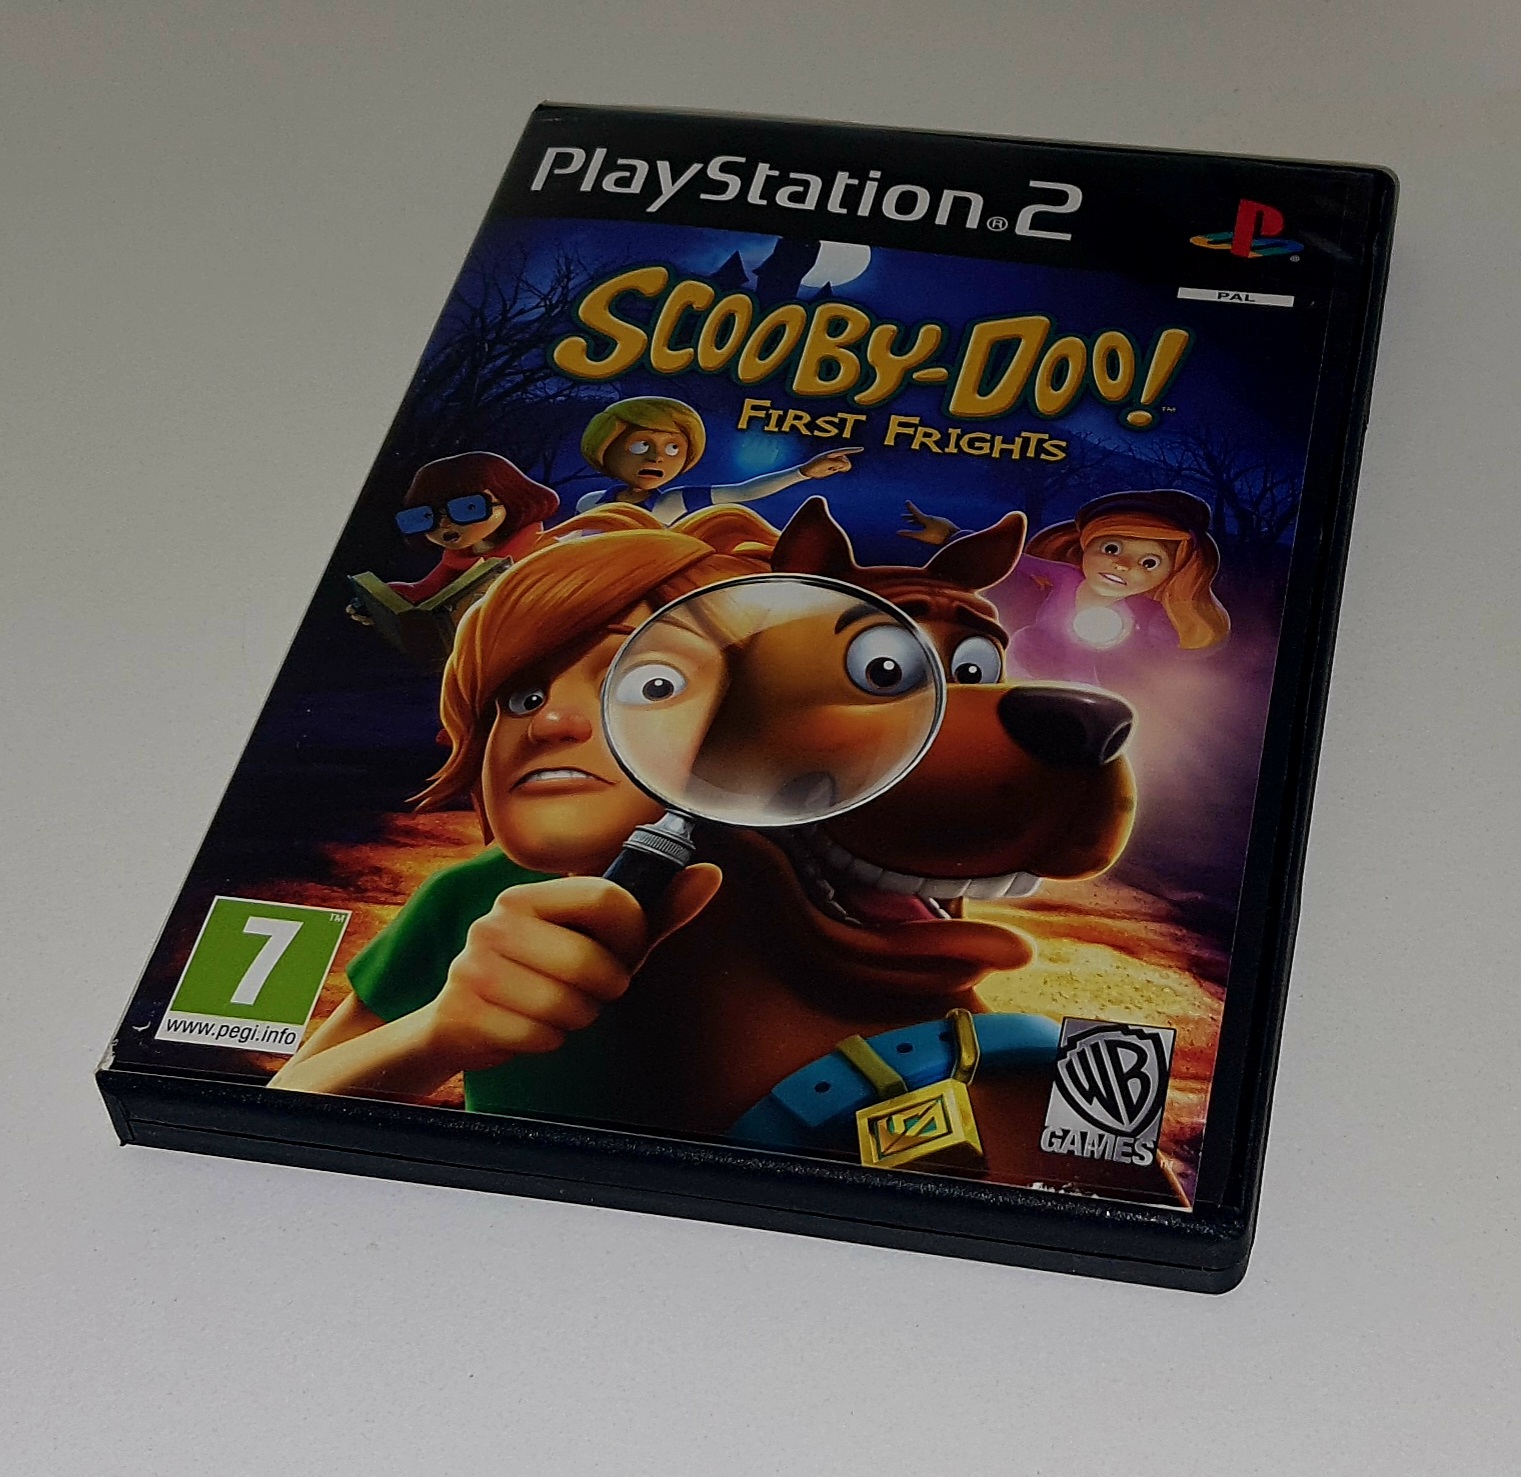 Scooby Doo – First Frights – PS2 – PAL